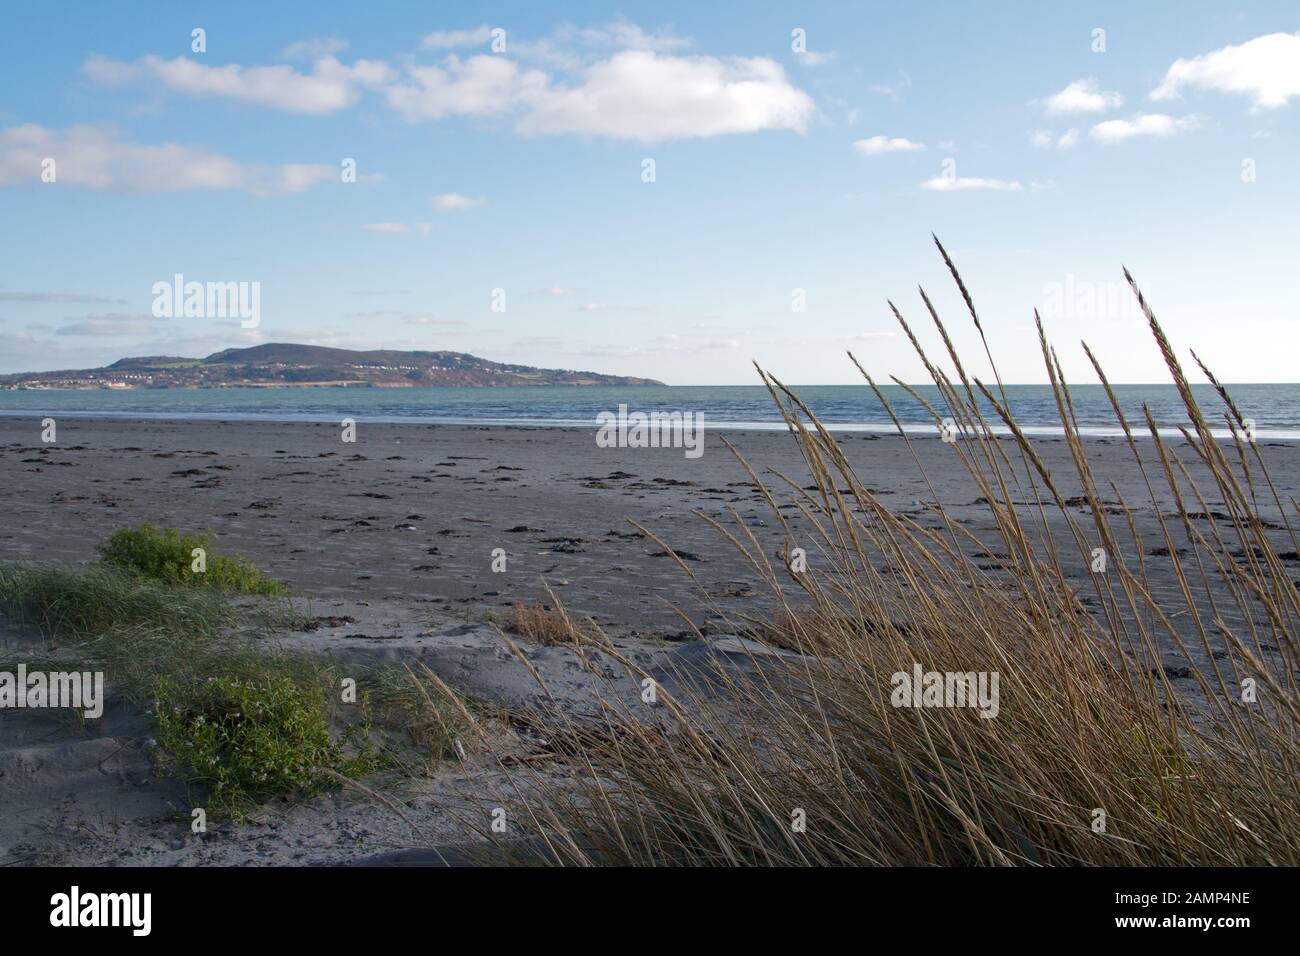 Dollymount Strand in Dublin Ireland. Howth Head can be seen in the distance. Stock Photo